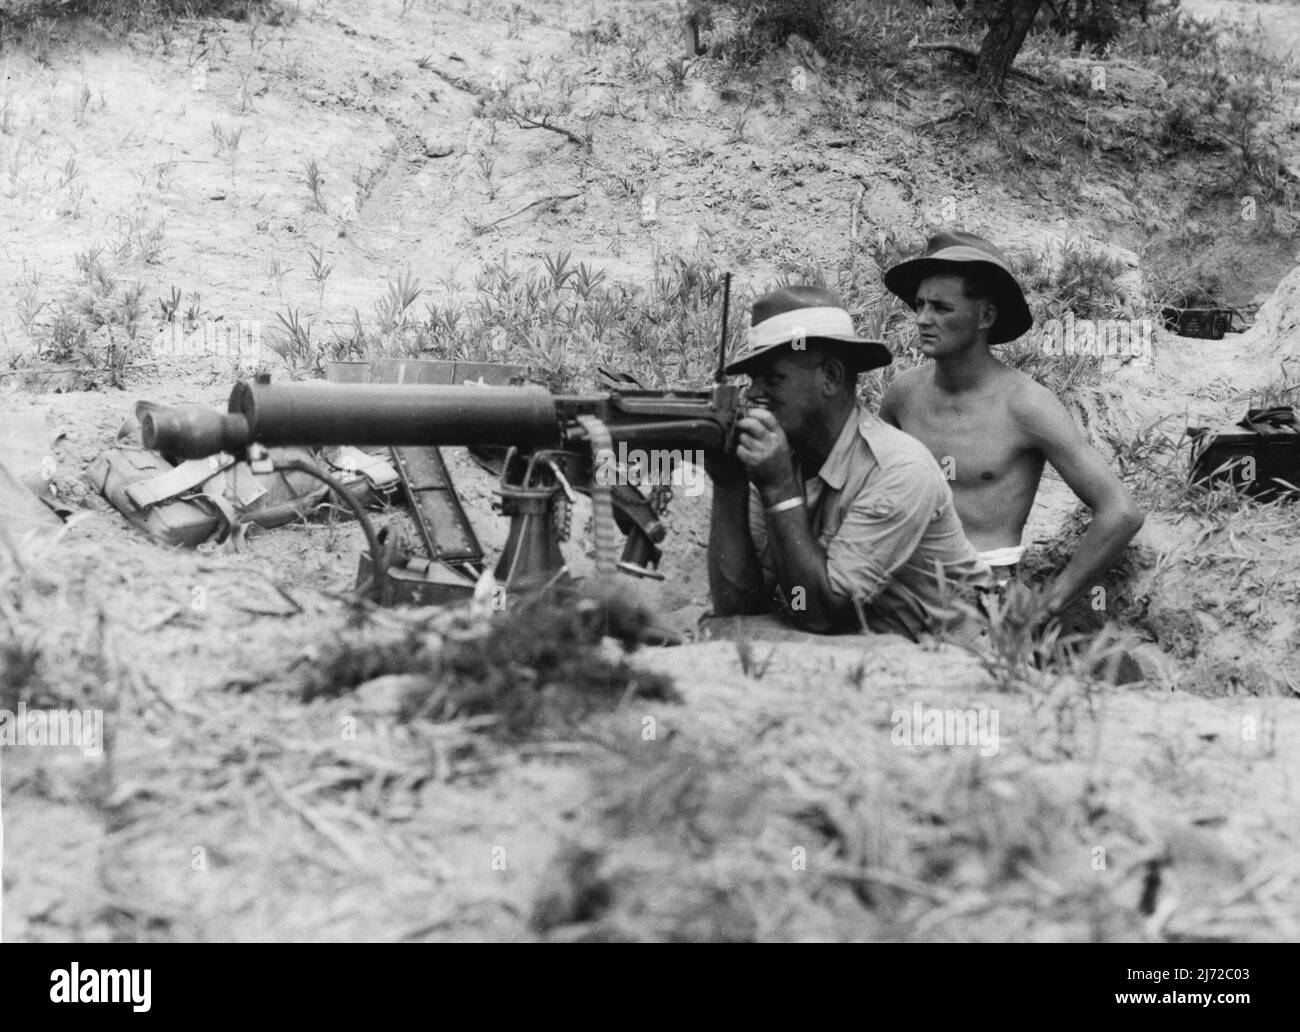 Firing a Vickers Gun from a foxhole during intensive training at Haramura Japan. WOII D. Griffiths of 14 cooper Street Cootamundra NSW and Pte D.R. Woods of Dairy Road Ingleburn NSW. The British Commonwealth Occupation Force in Japan is being raised to war time strength and 3 Bn Royal Australian Regiment has been training intensively for the type of terrain which will have to be covered in Korea. September 13, 1950. (Photo by Public Relations Section, HQ BCOF). Stock Photo